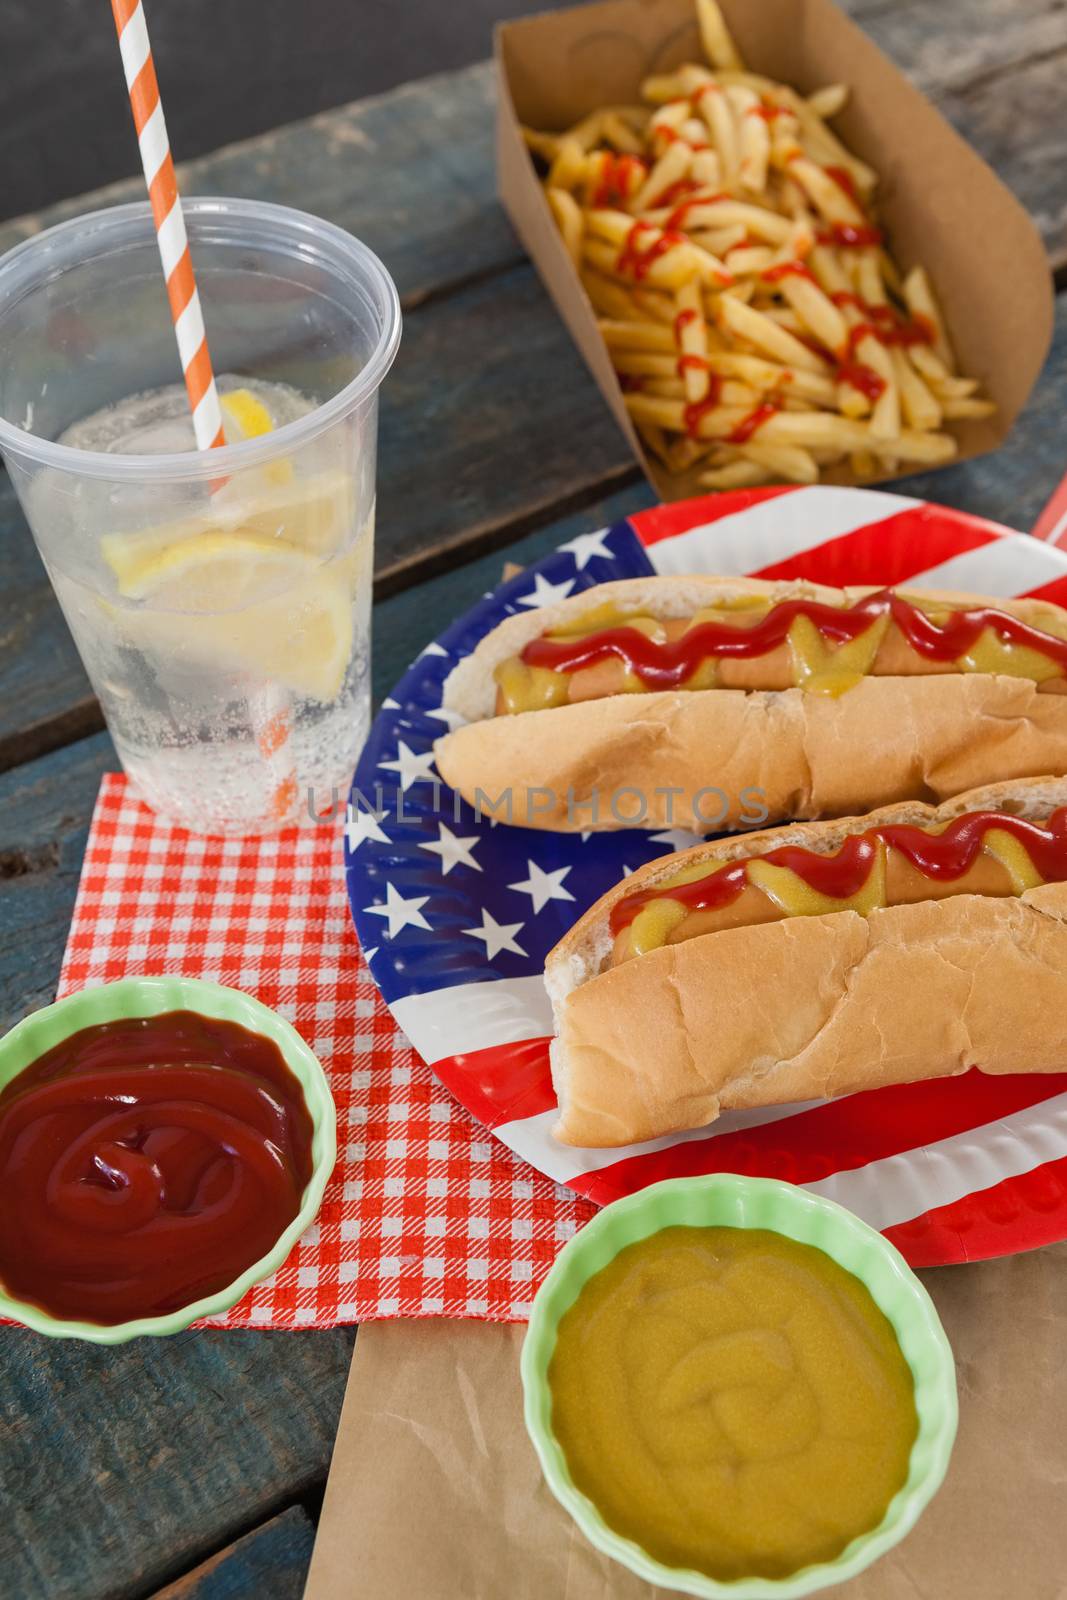 Hot dog served on plate with french fries with 4th july theme